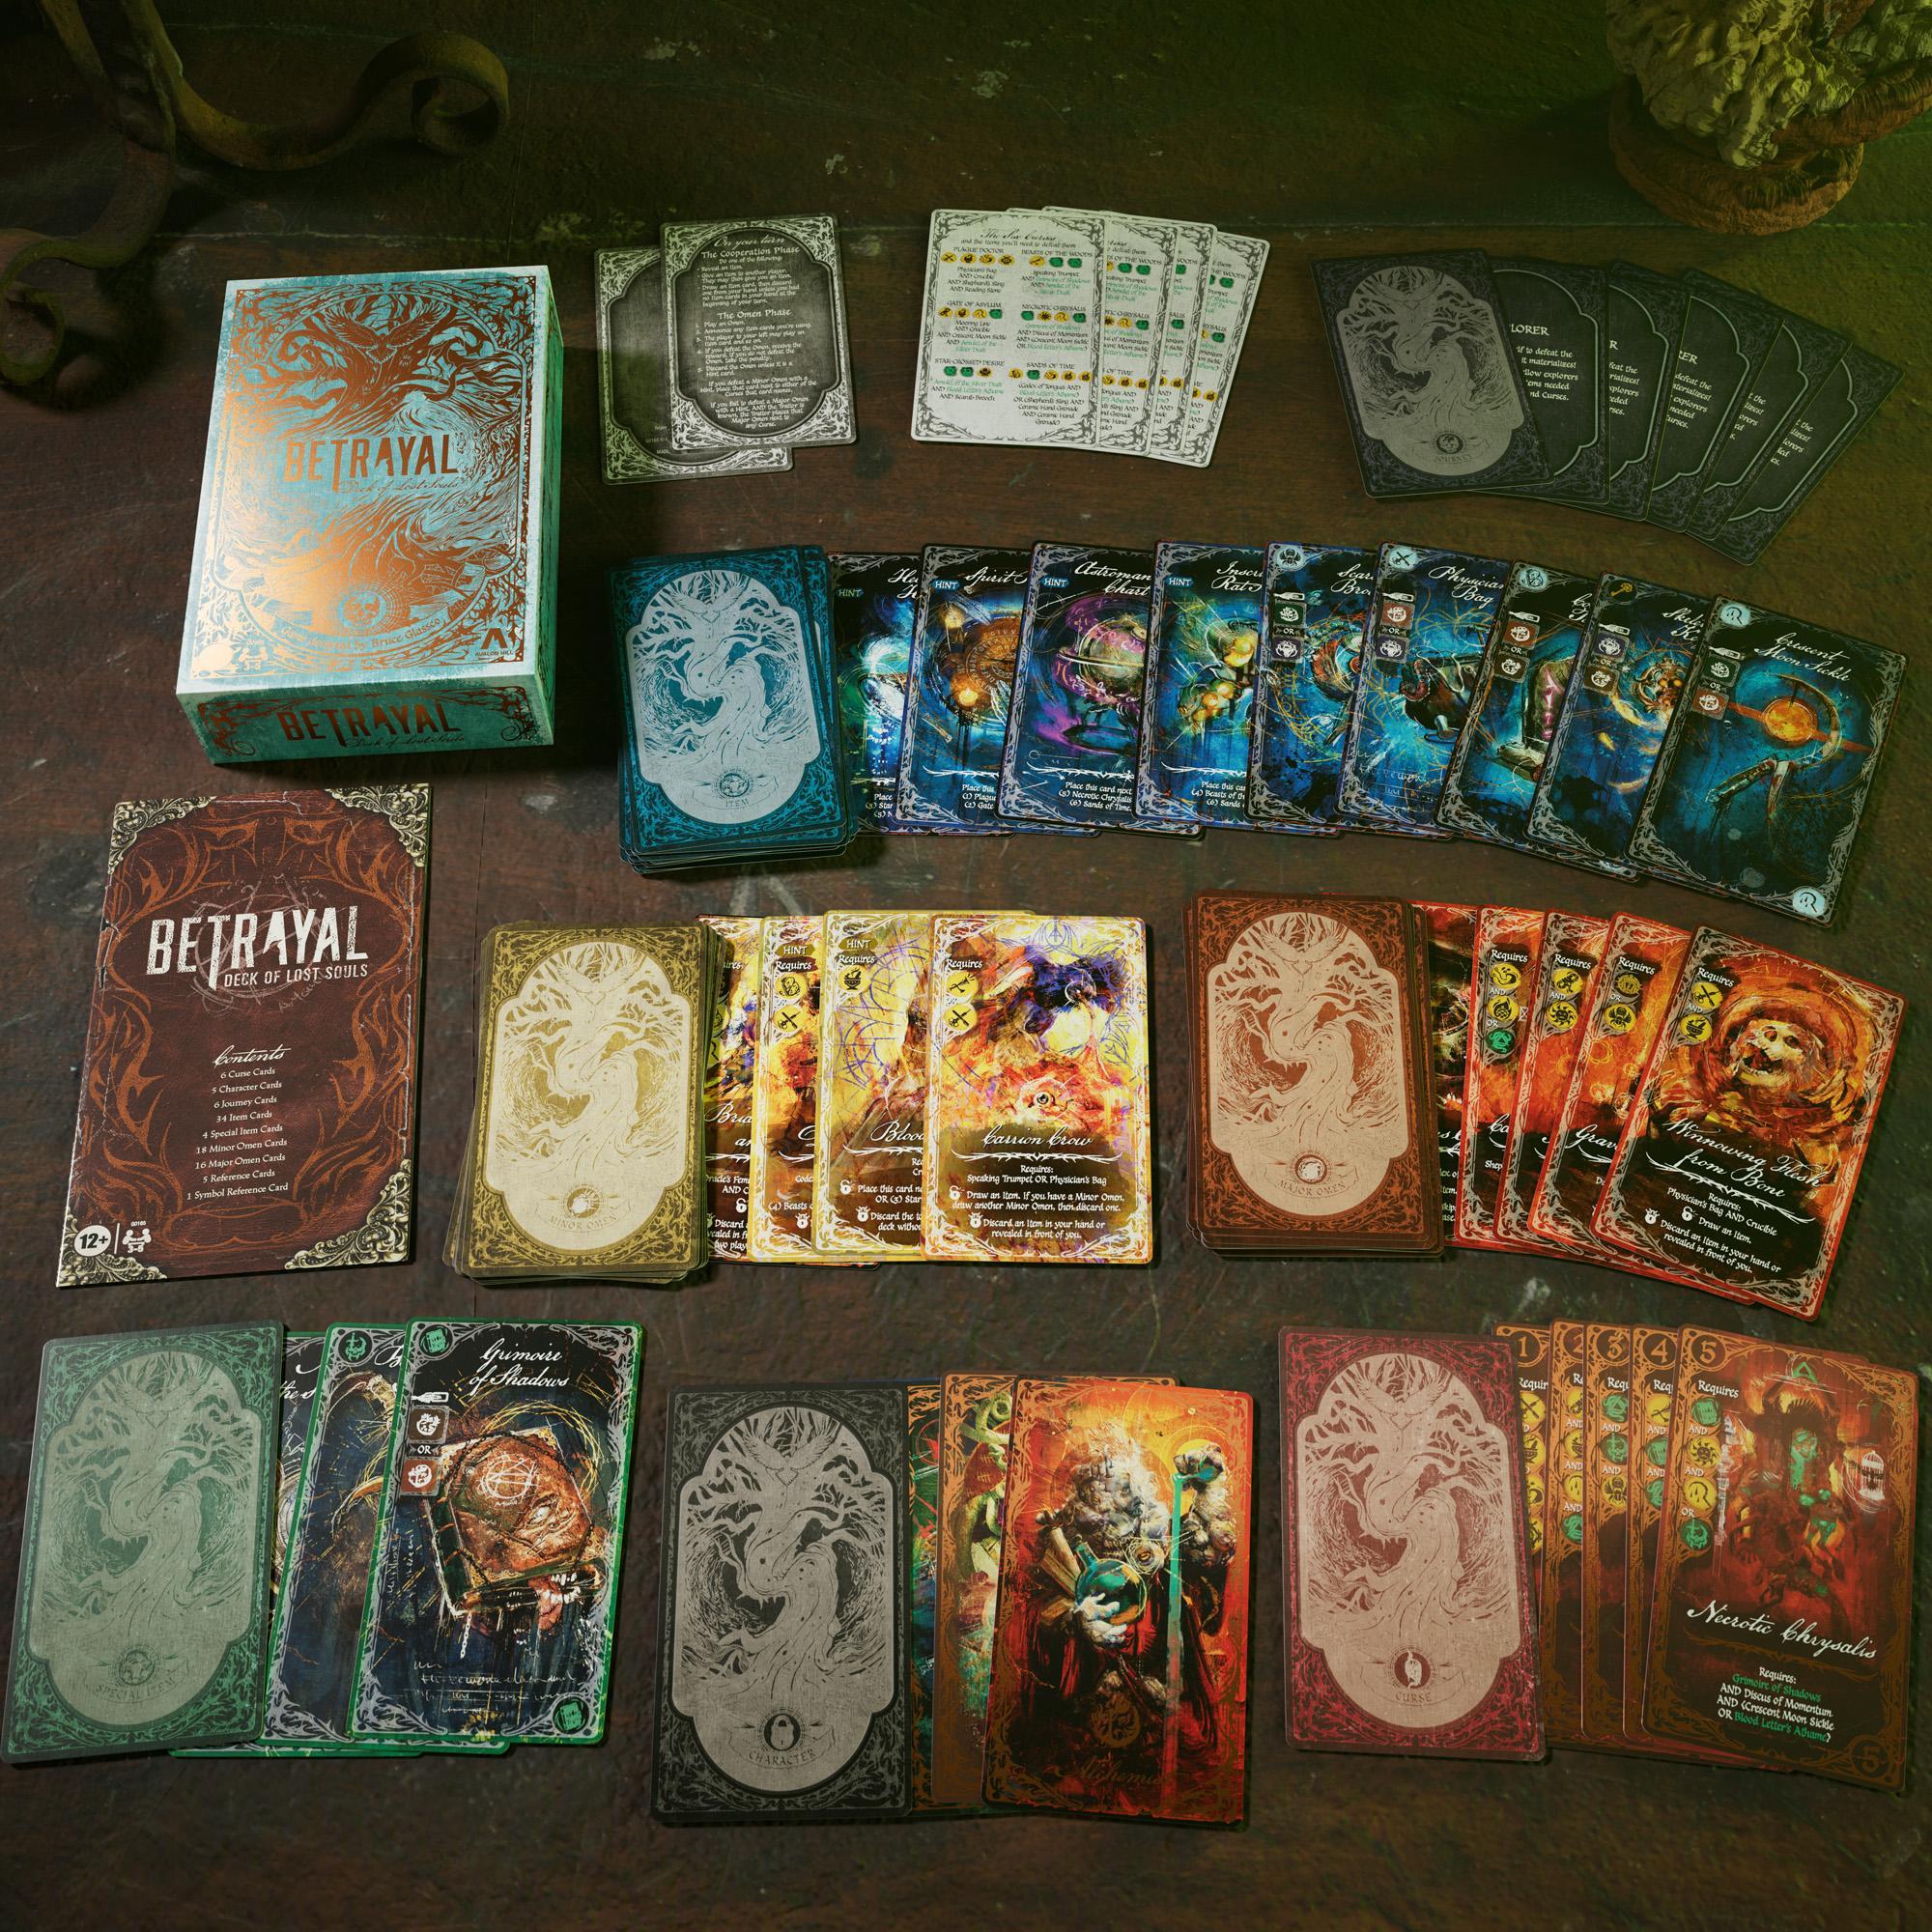 Betrayal Deck of Lost Souls Card Game, Tarot-Inspired Secret Roles Game, Strategy Games for Ages 12+ product thumbnail 1